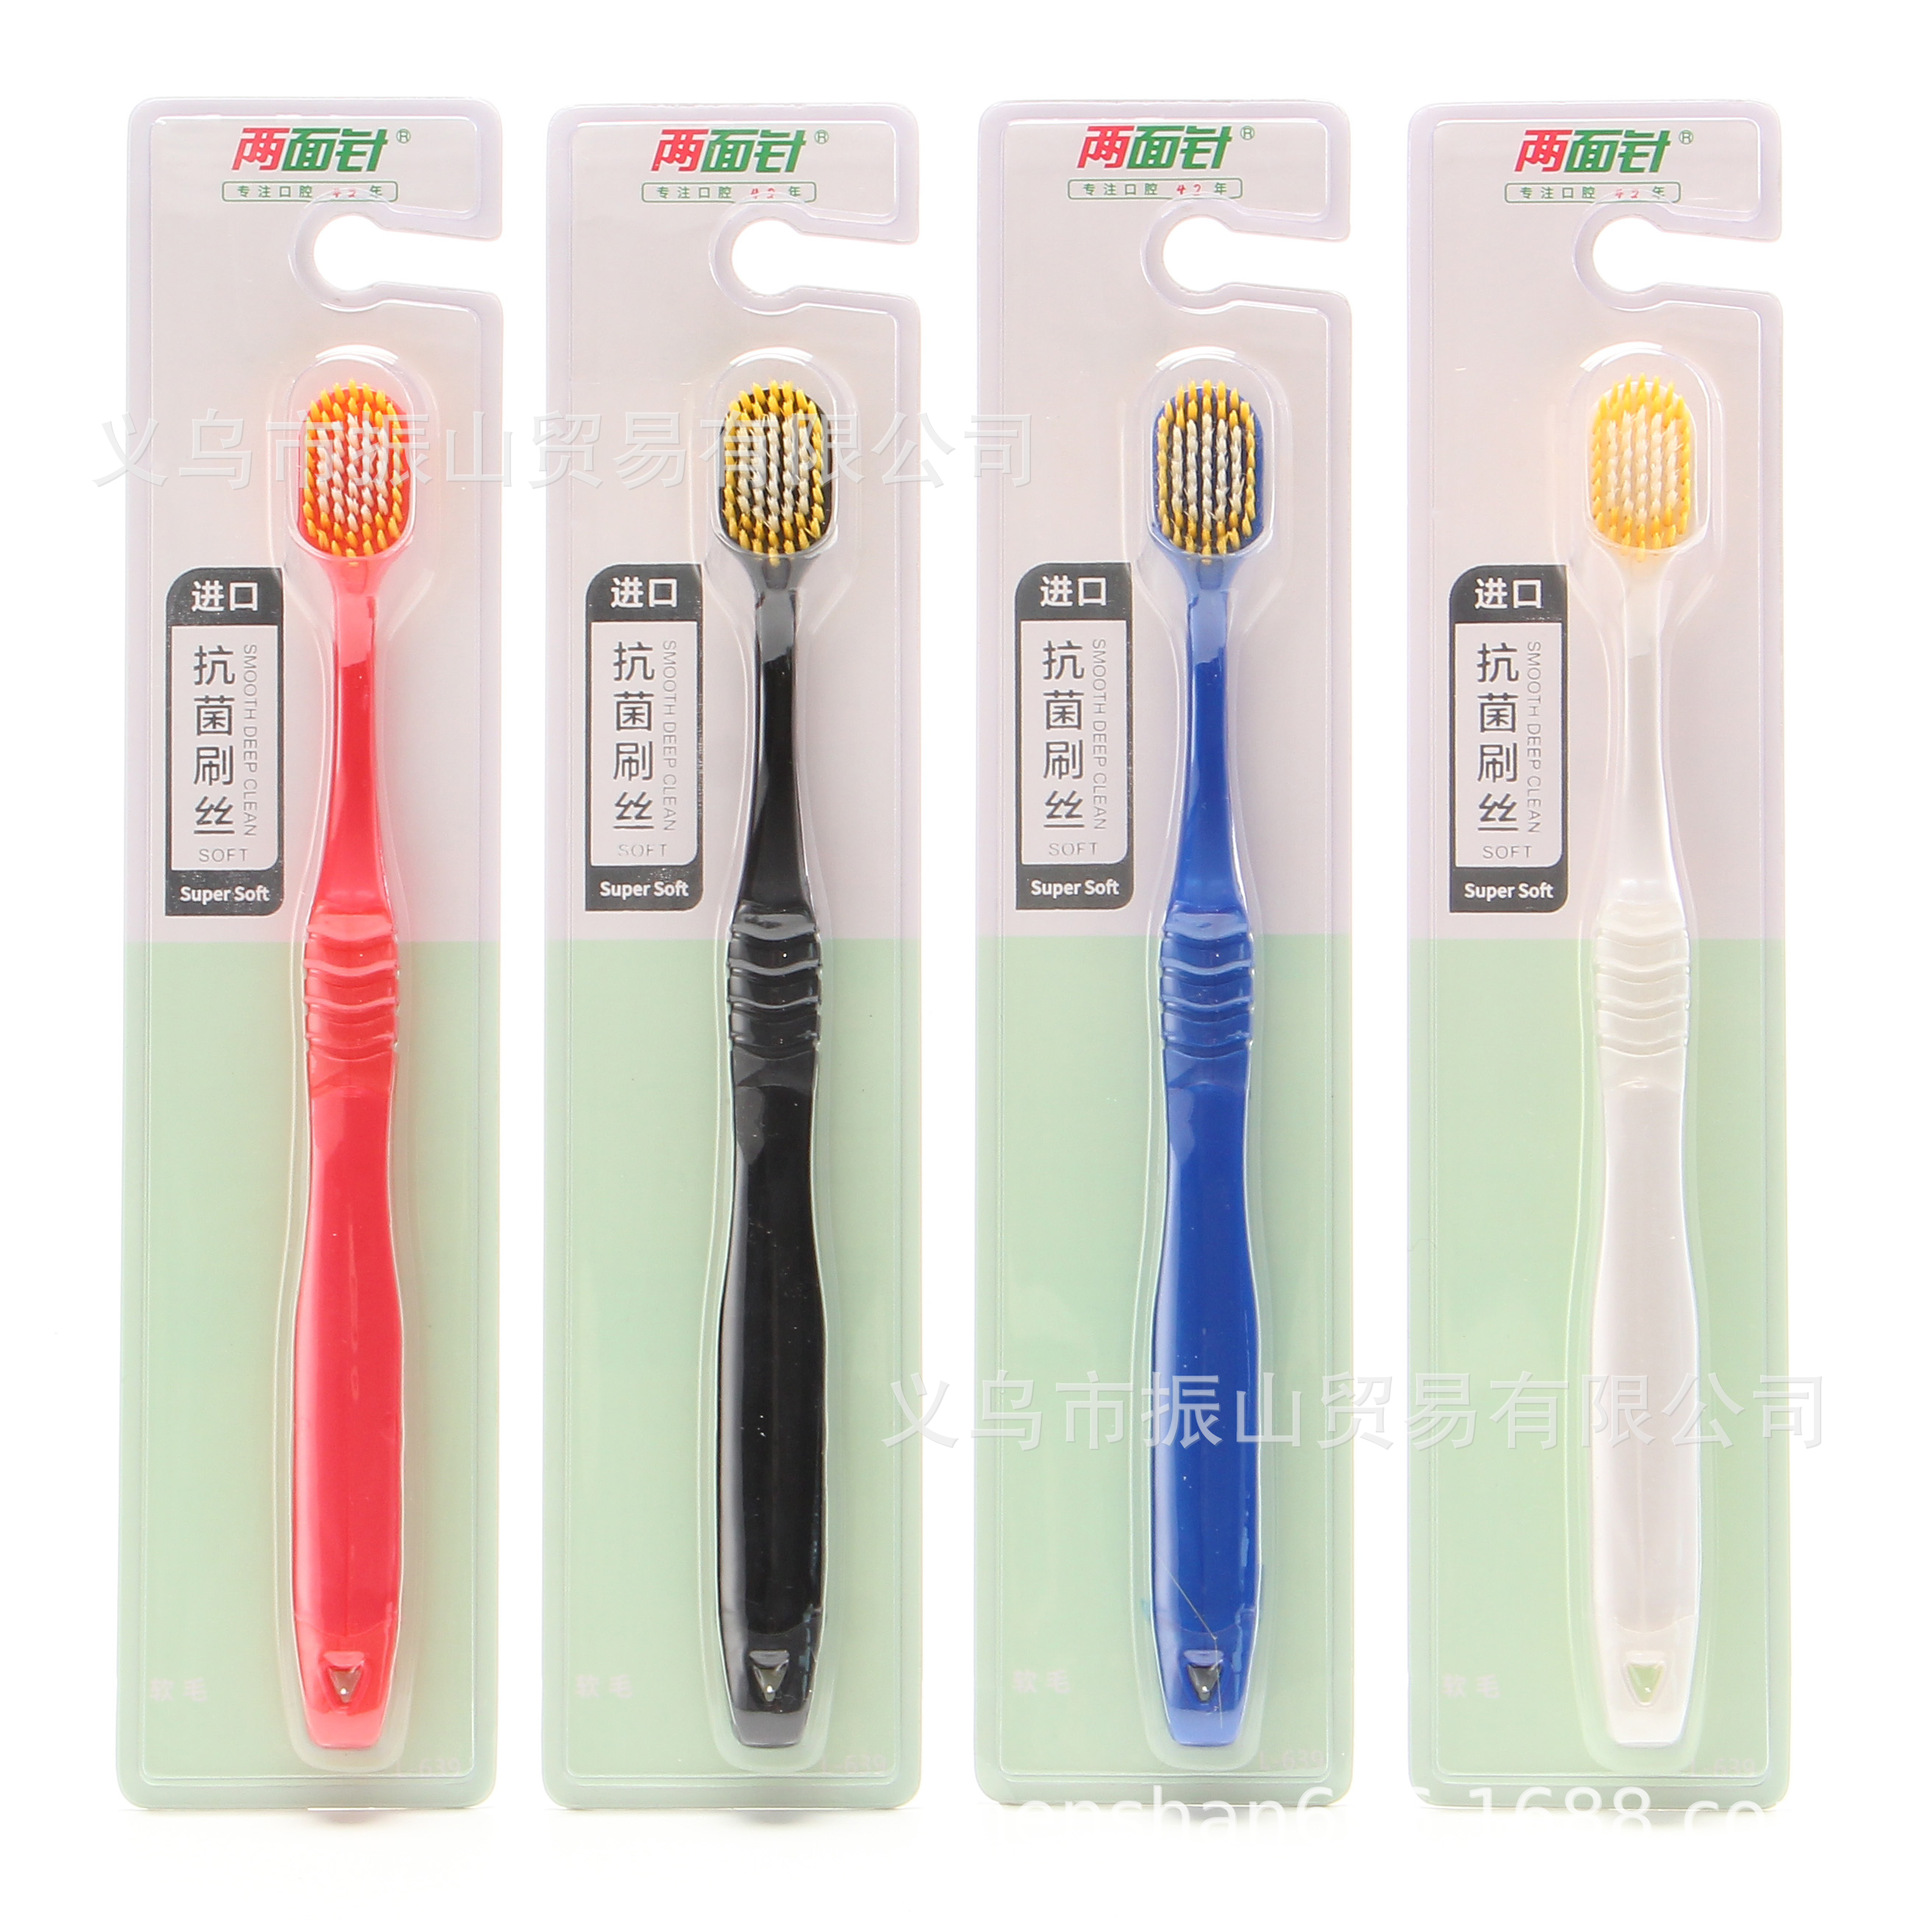 lmz639 ingenious manufacturing focus on oral cavity 42 years comfortable wide head lazy soft hair toothbrush